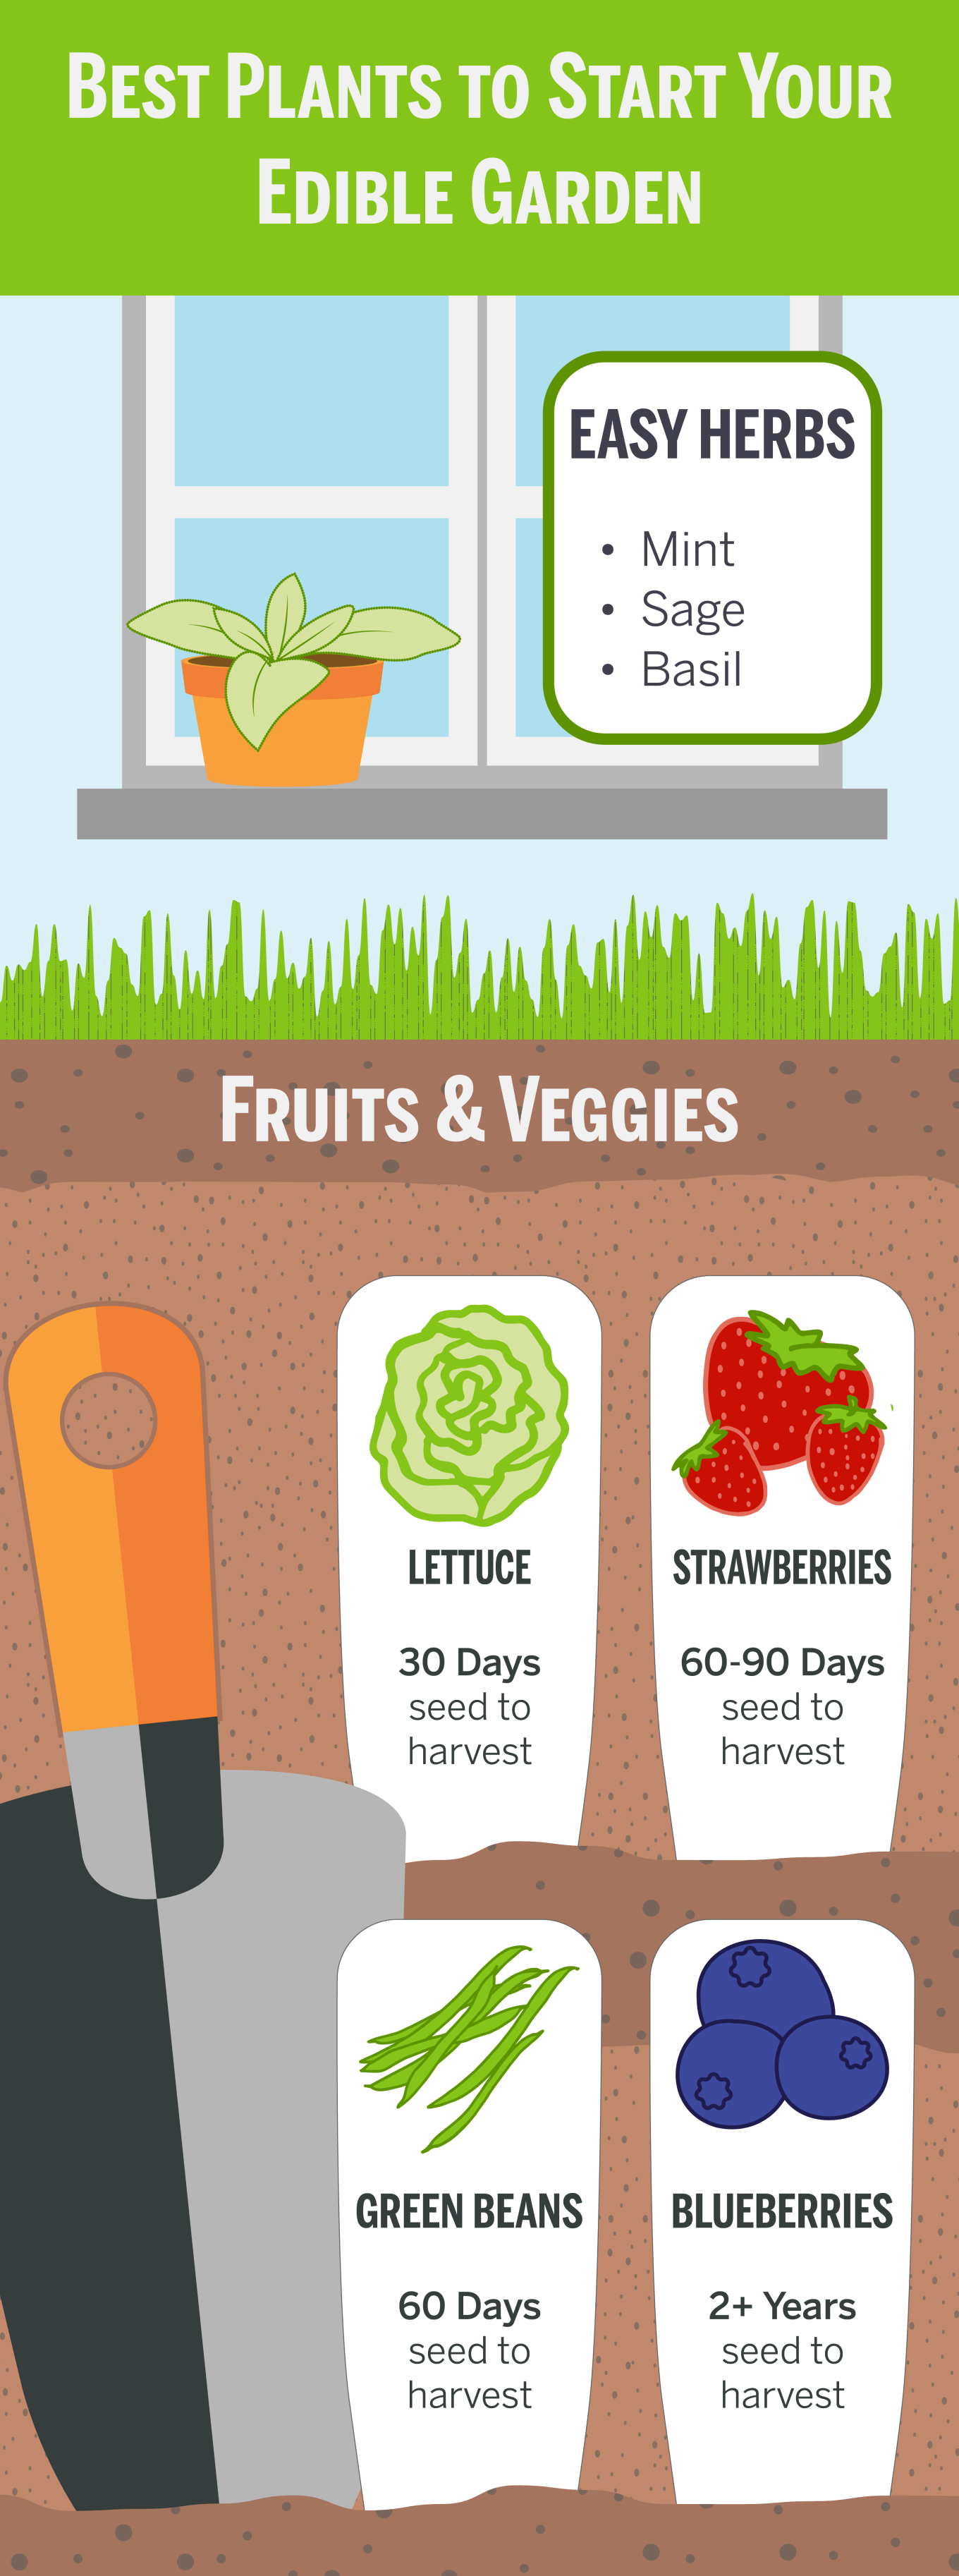 An infographic showing the best plants to start an edible garden (listed below).